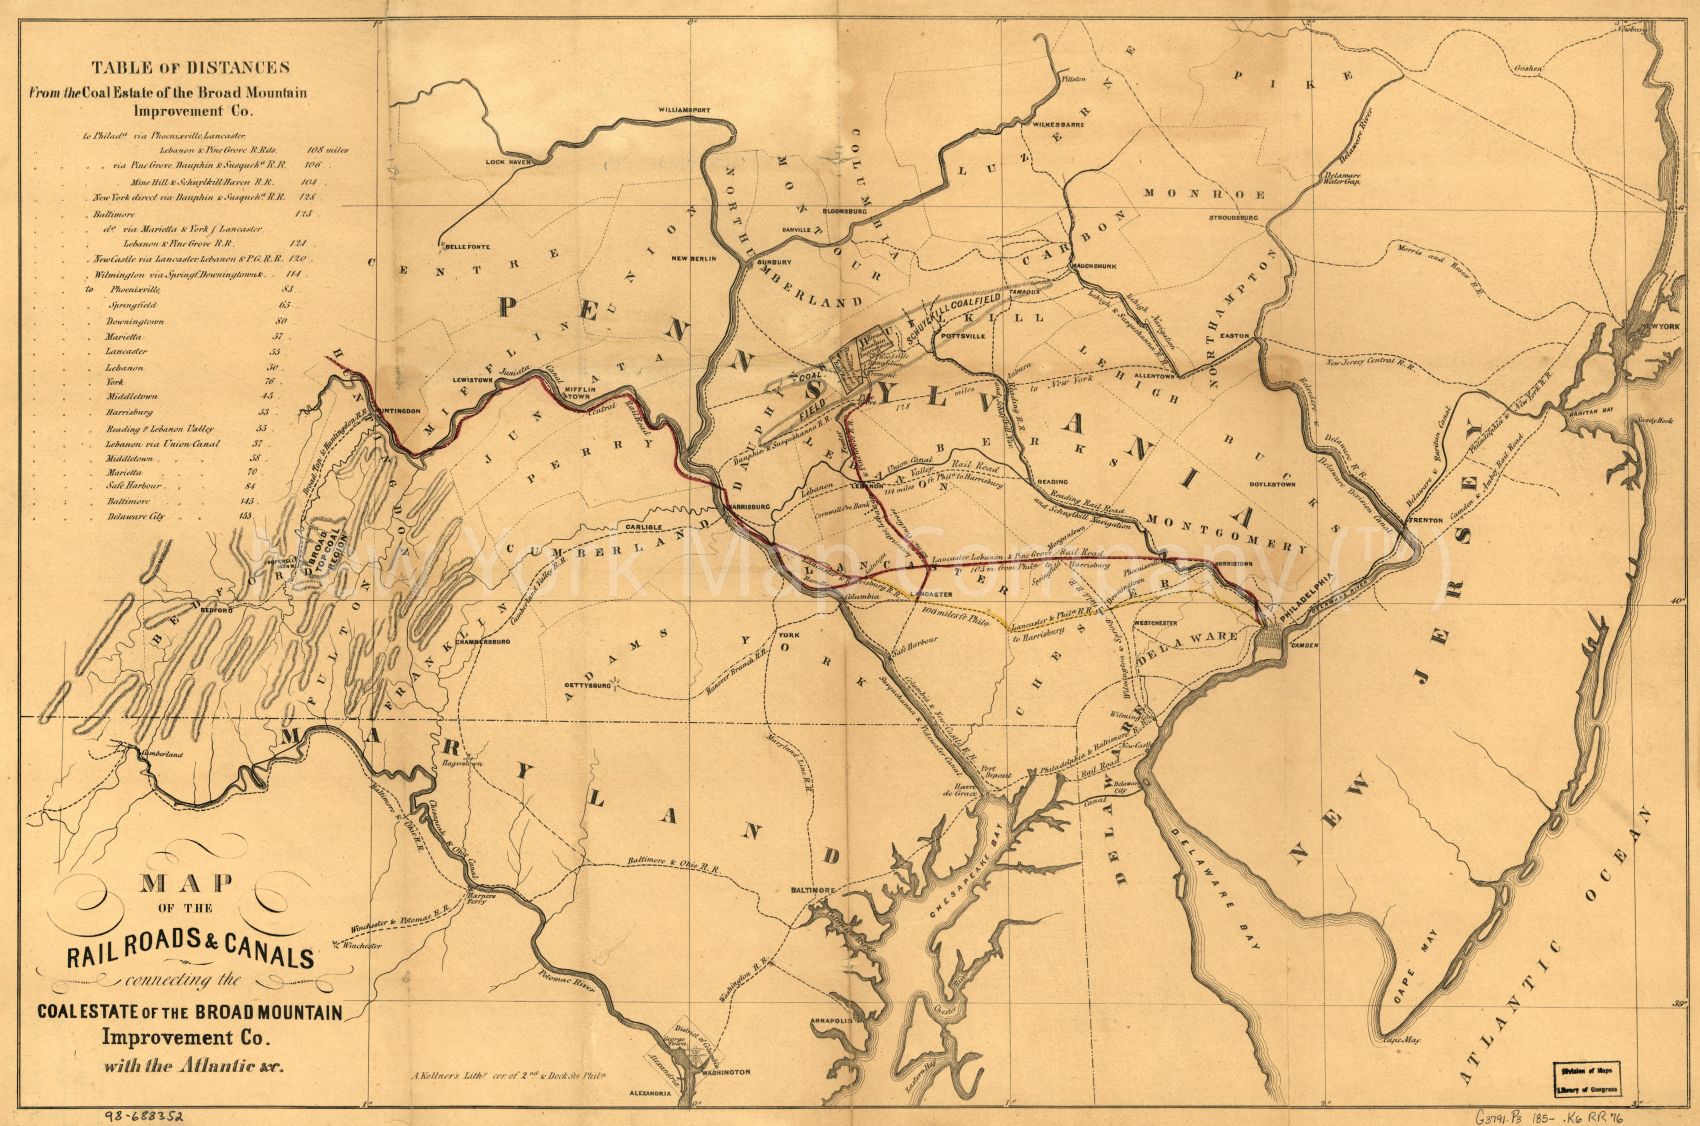 1850 map of the railroads and canals connecting the coal estate of the Broad Mountain Improvement Co., with the Atlantic andc. Outline map indicating the railroad network in central Pennsylvania, parts of Maryland, Delaware and New Jersey. Map Subjects: